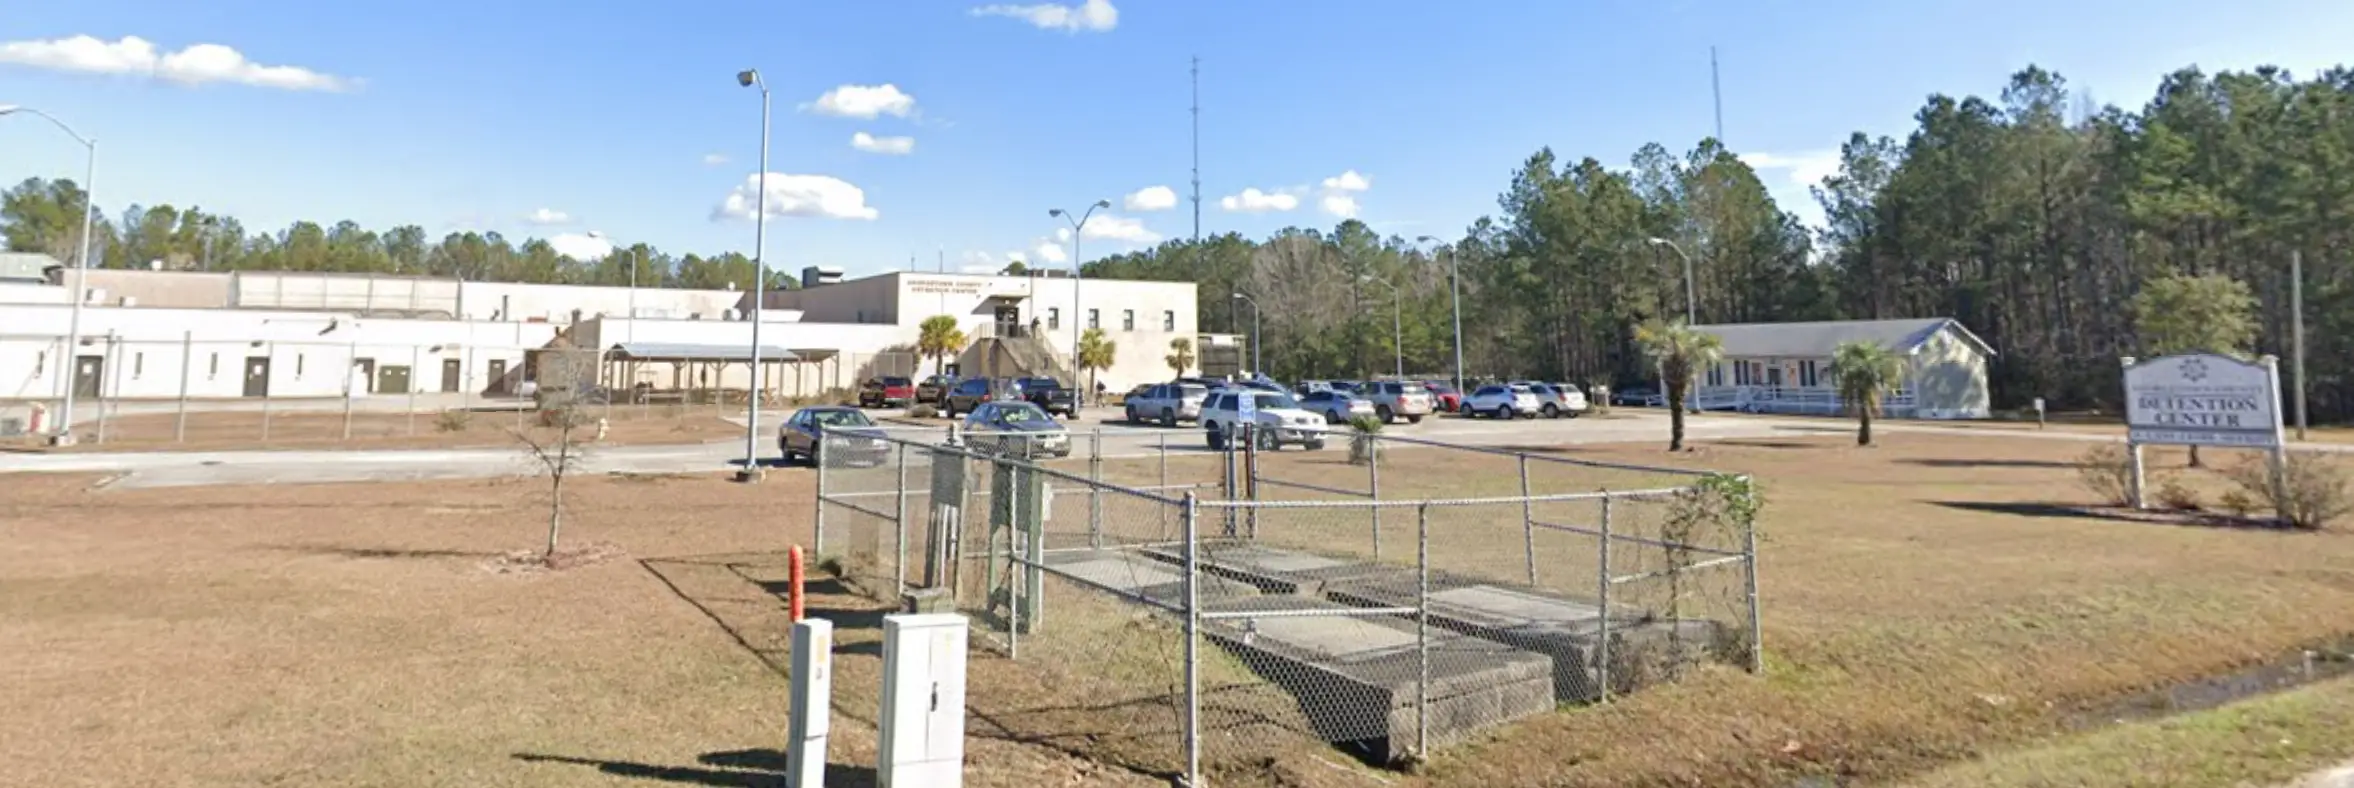 Photos Georgetown County Detention Center 1